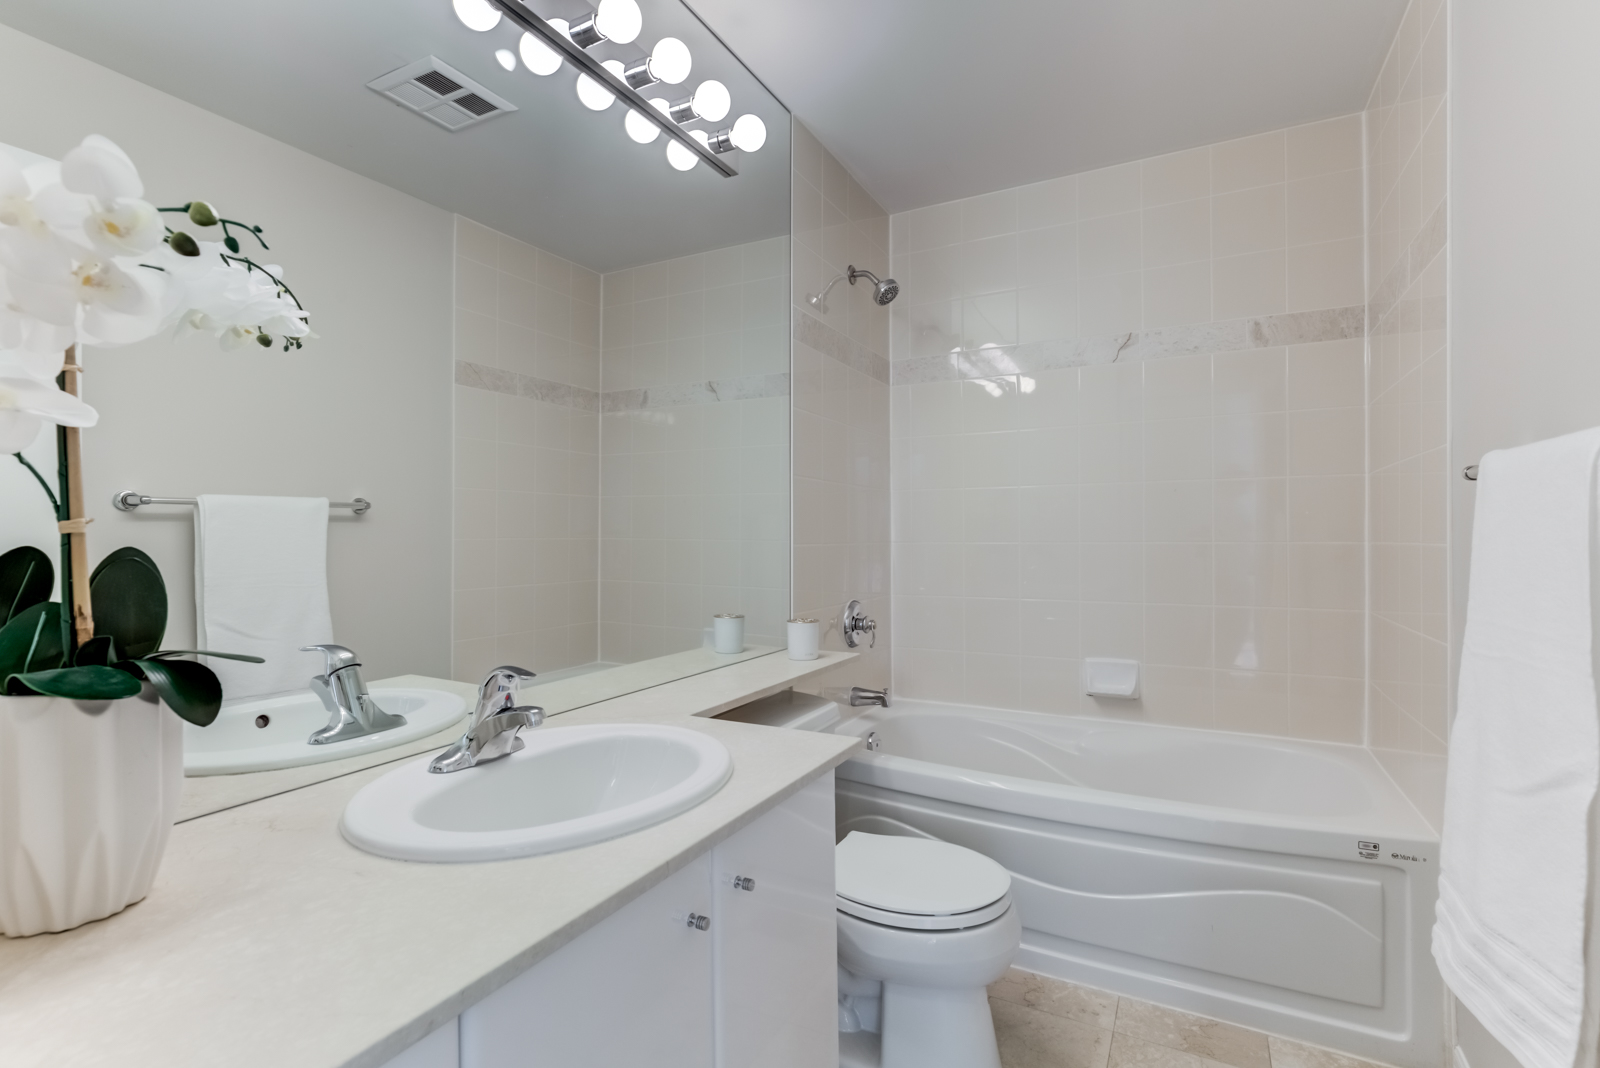 300 Bloor St E Unit 1809 ensuite bath with white counters, cabinets, beige tiles, white tub and chrome fixtures.